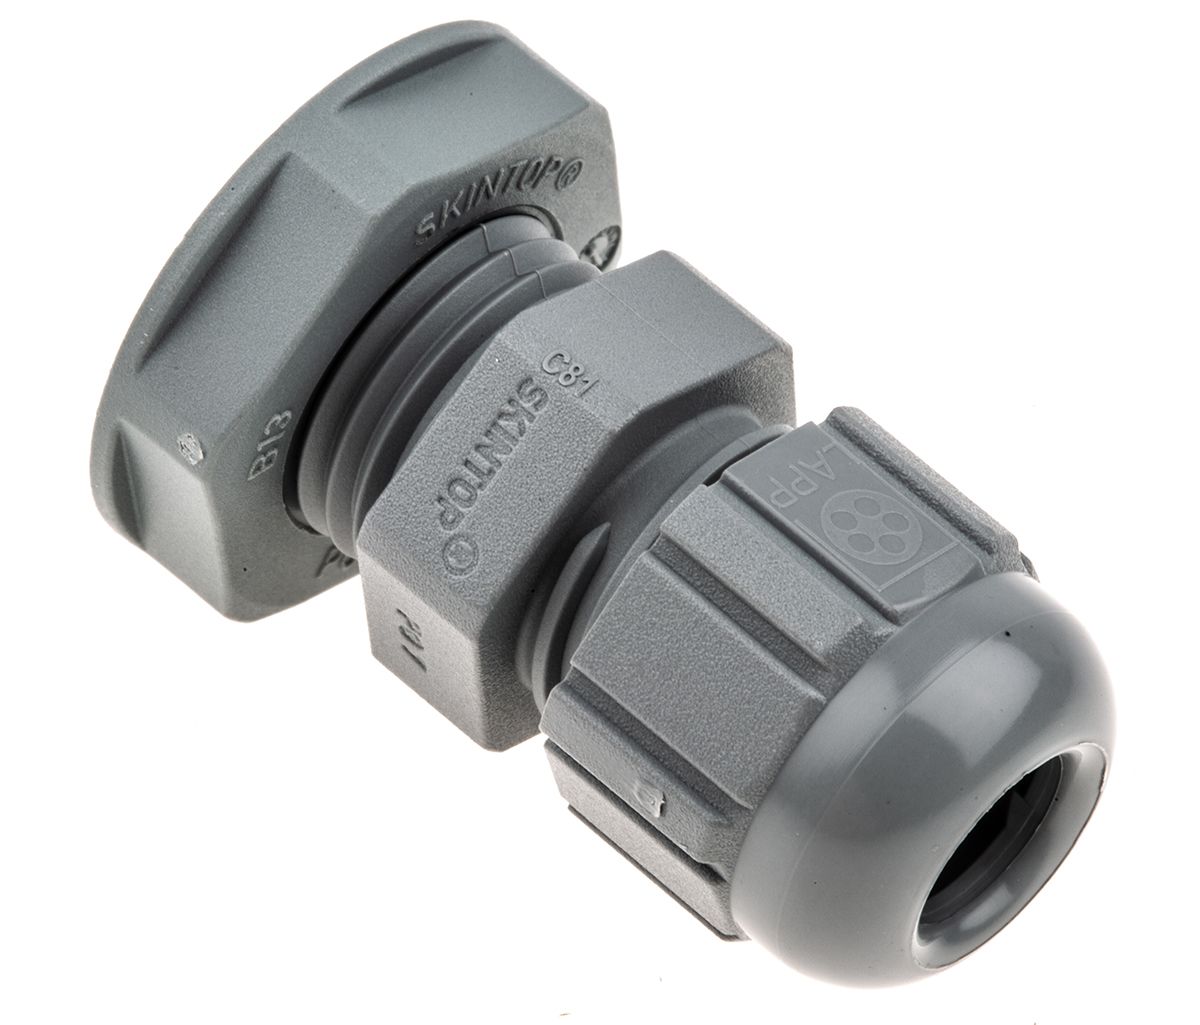 Lapp SKINTOP Series Grey Polyamide Cable Gland, PG7 Thread, 2.5mm Min, 6.5mm Max, IP68